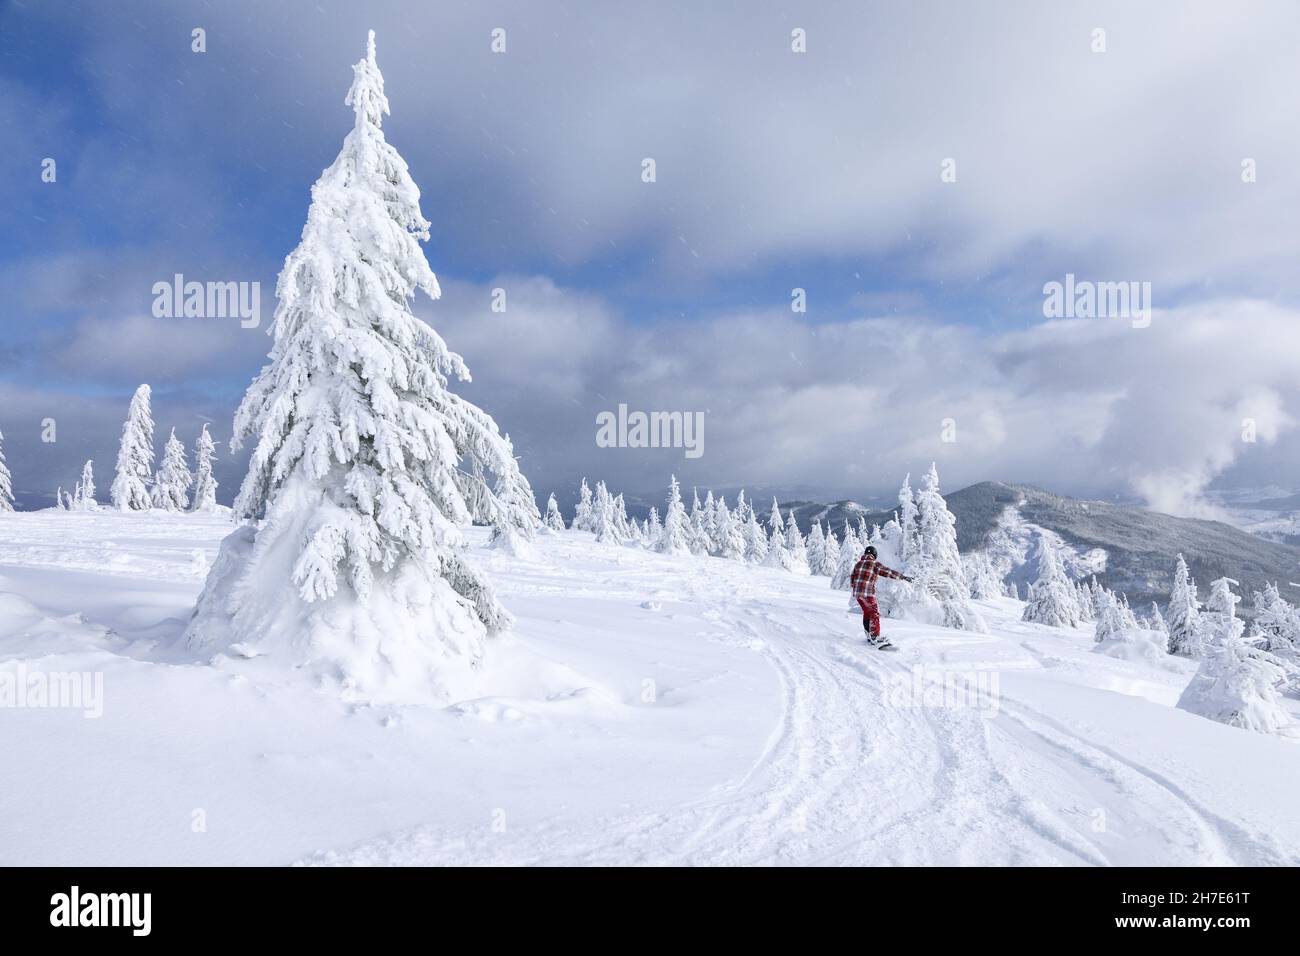 Snowboarders and skier ride through the wild forest on a beautiful cold winter day. Landscape of high mountains with snow. Wallpaper background. Locat Stock Photo